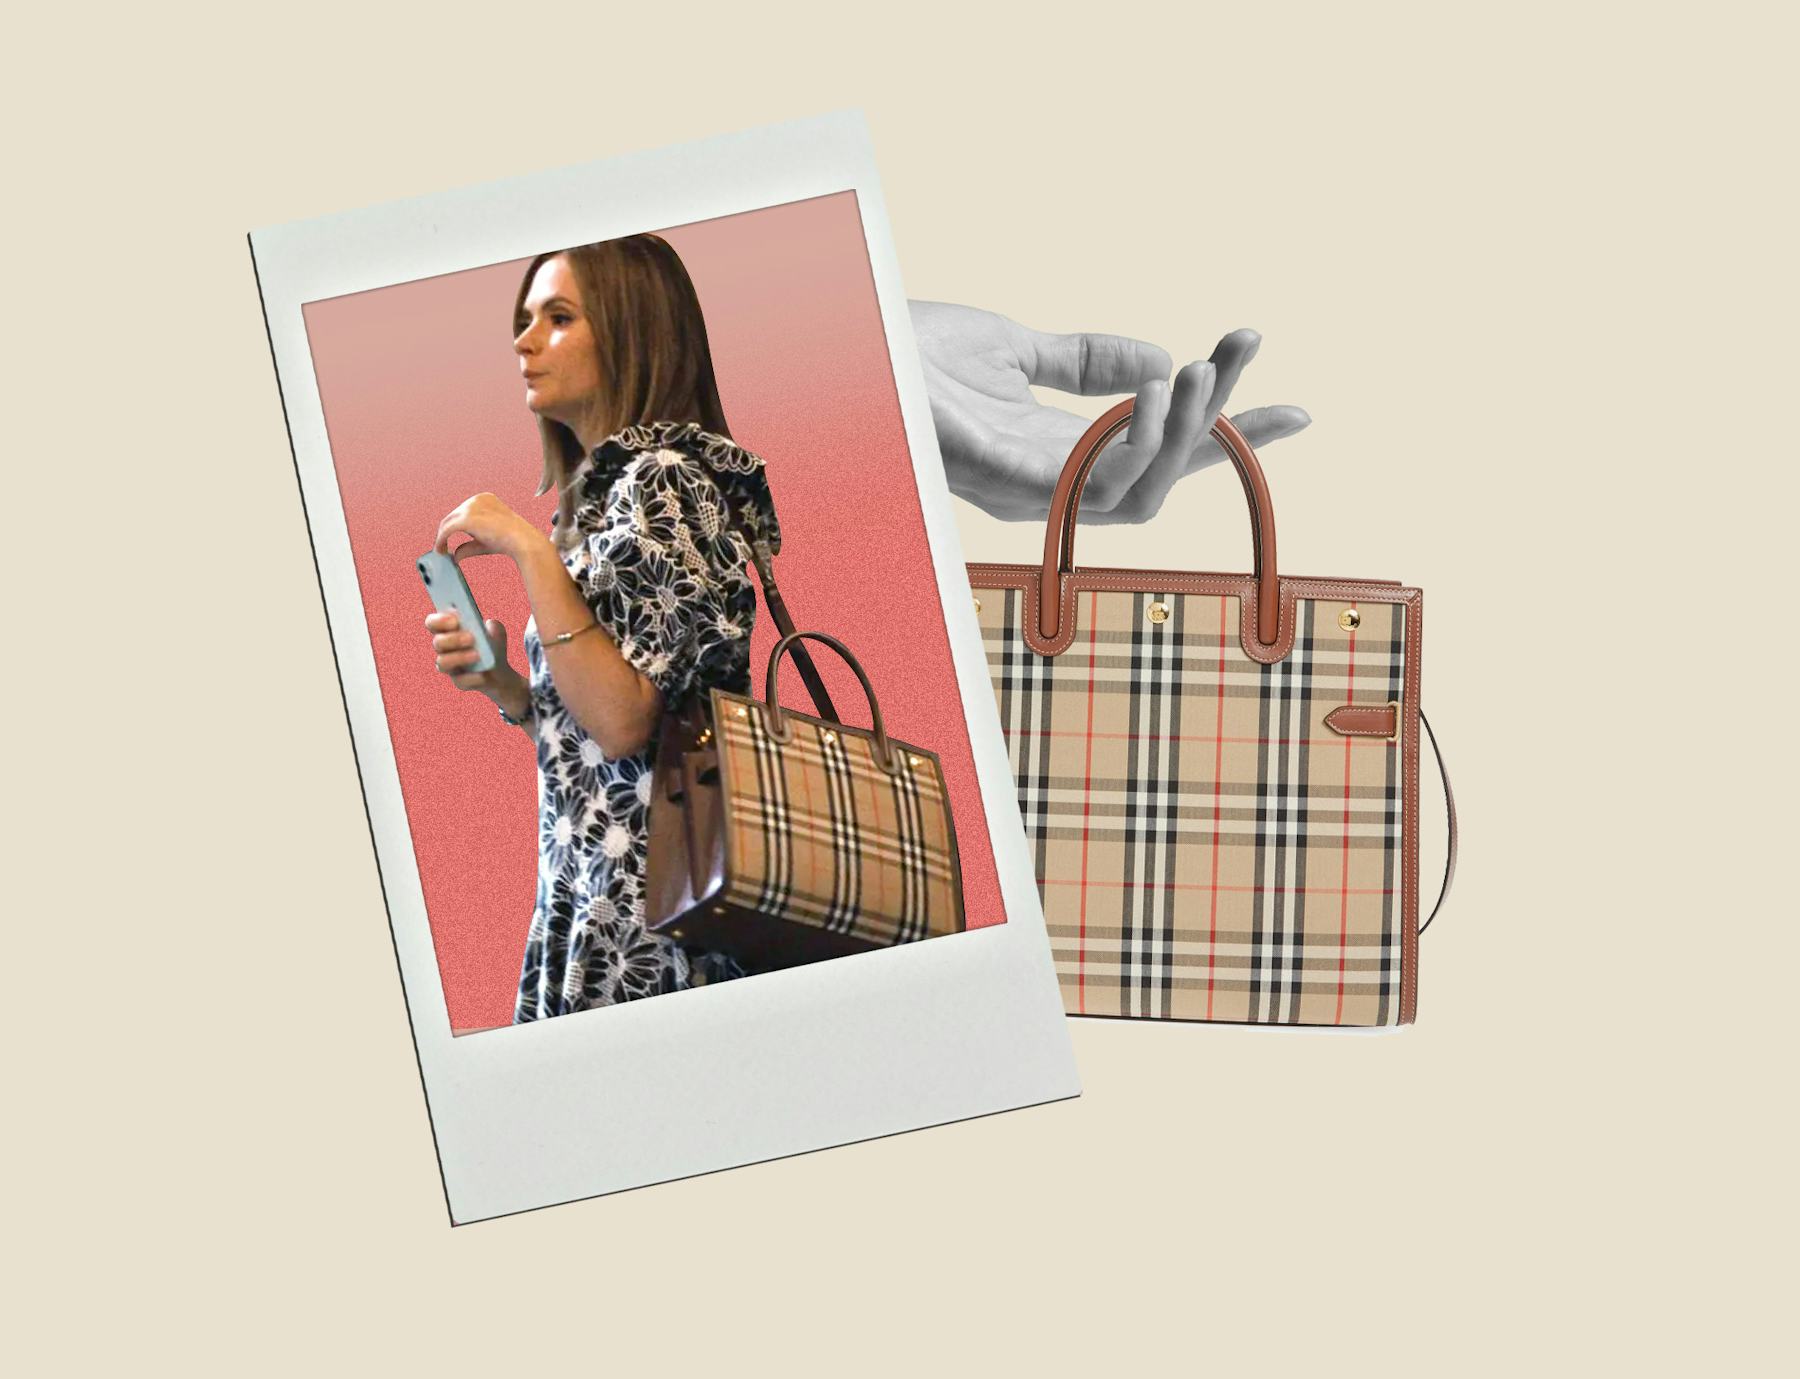 What To Know About Burberry’s Viral Plaid Tote Bag From 'Succession'